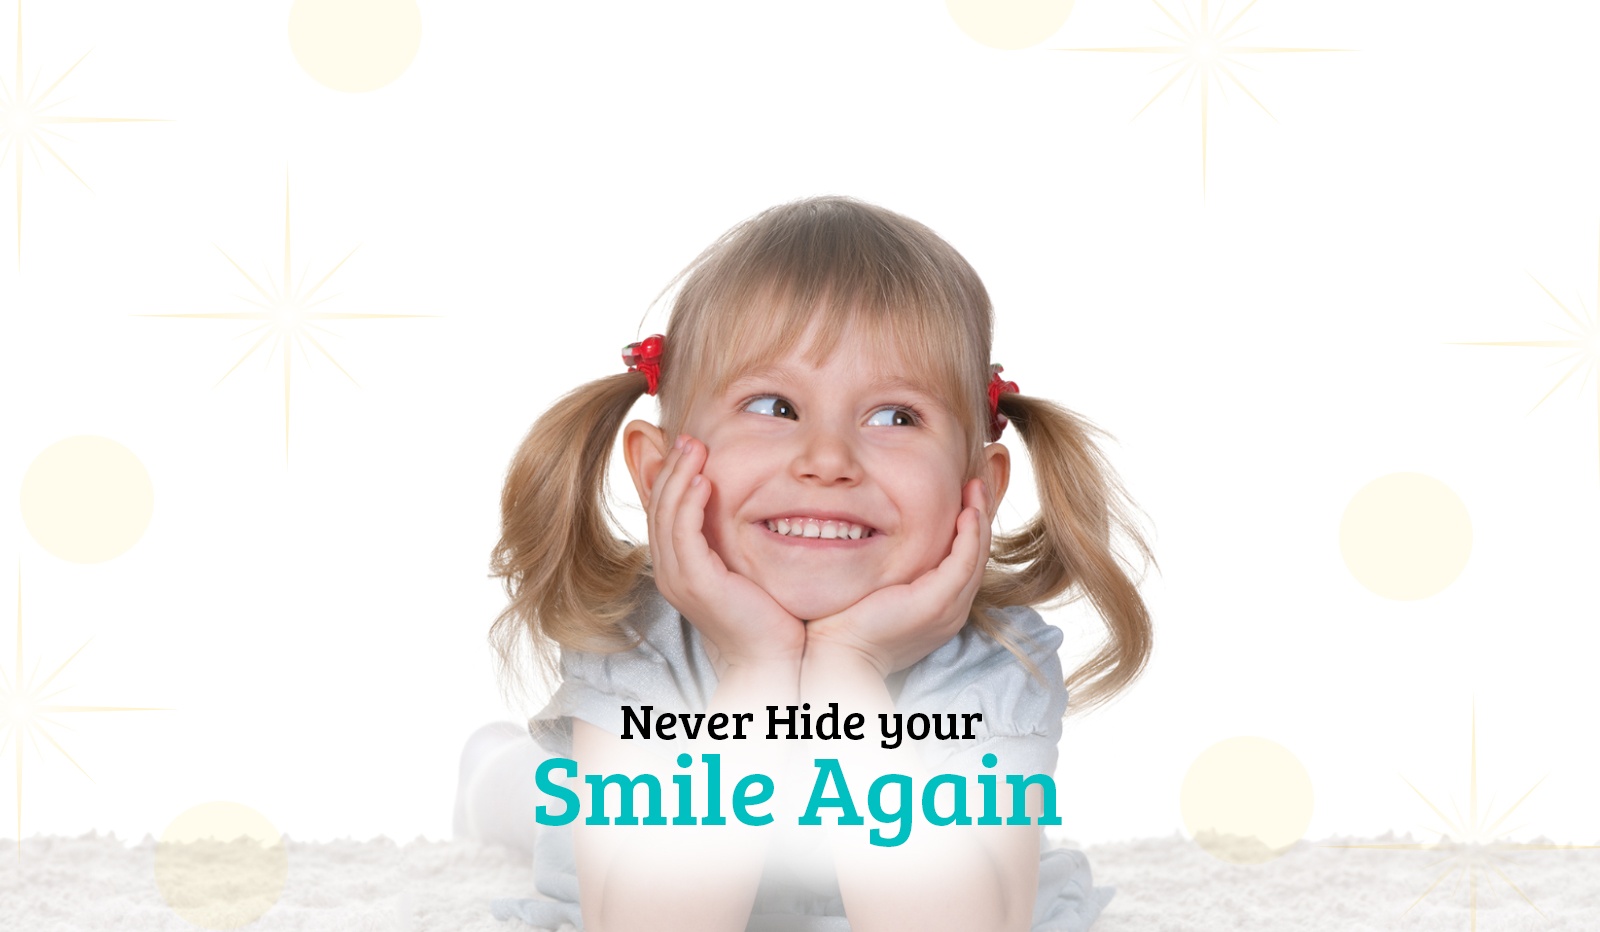 Never Hide Your Smile Again - Dental Services Toronto